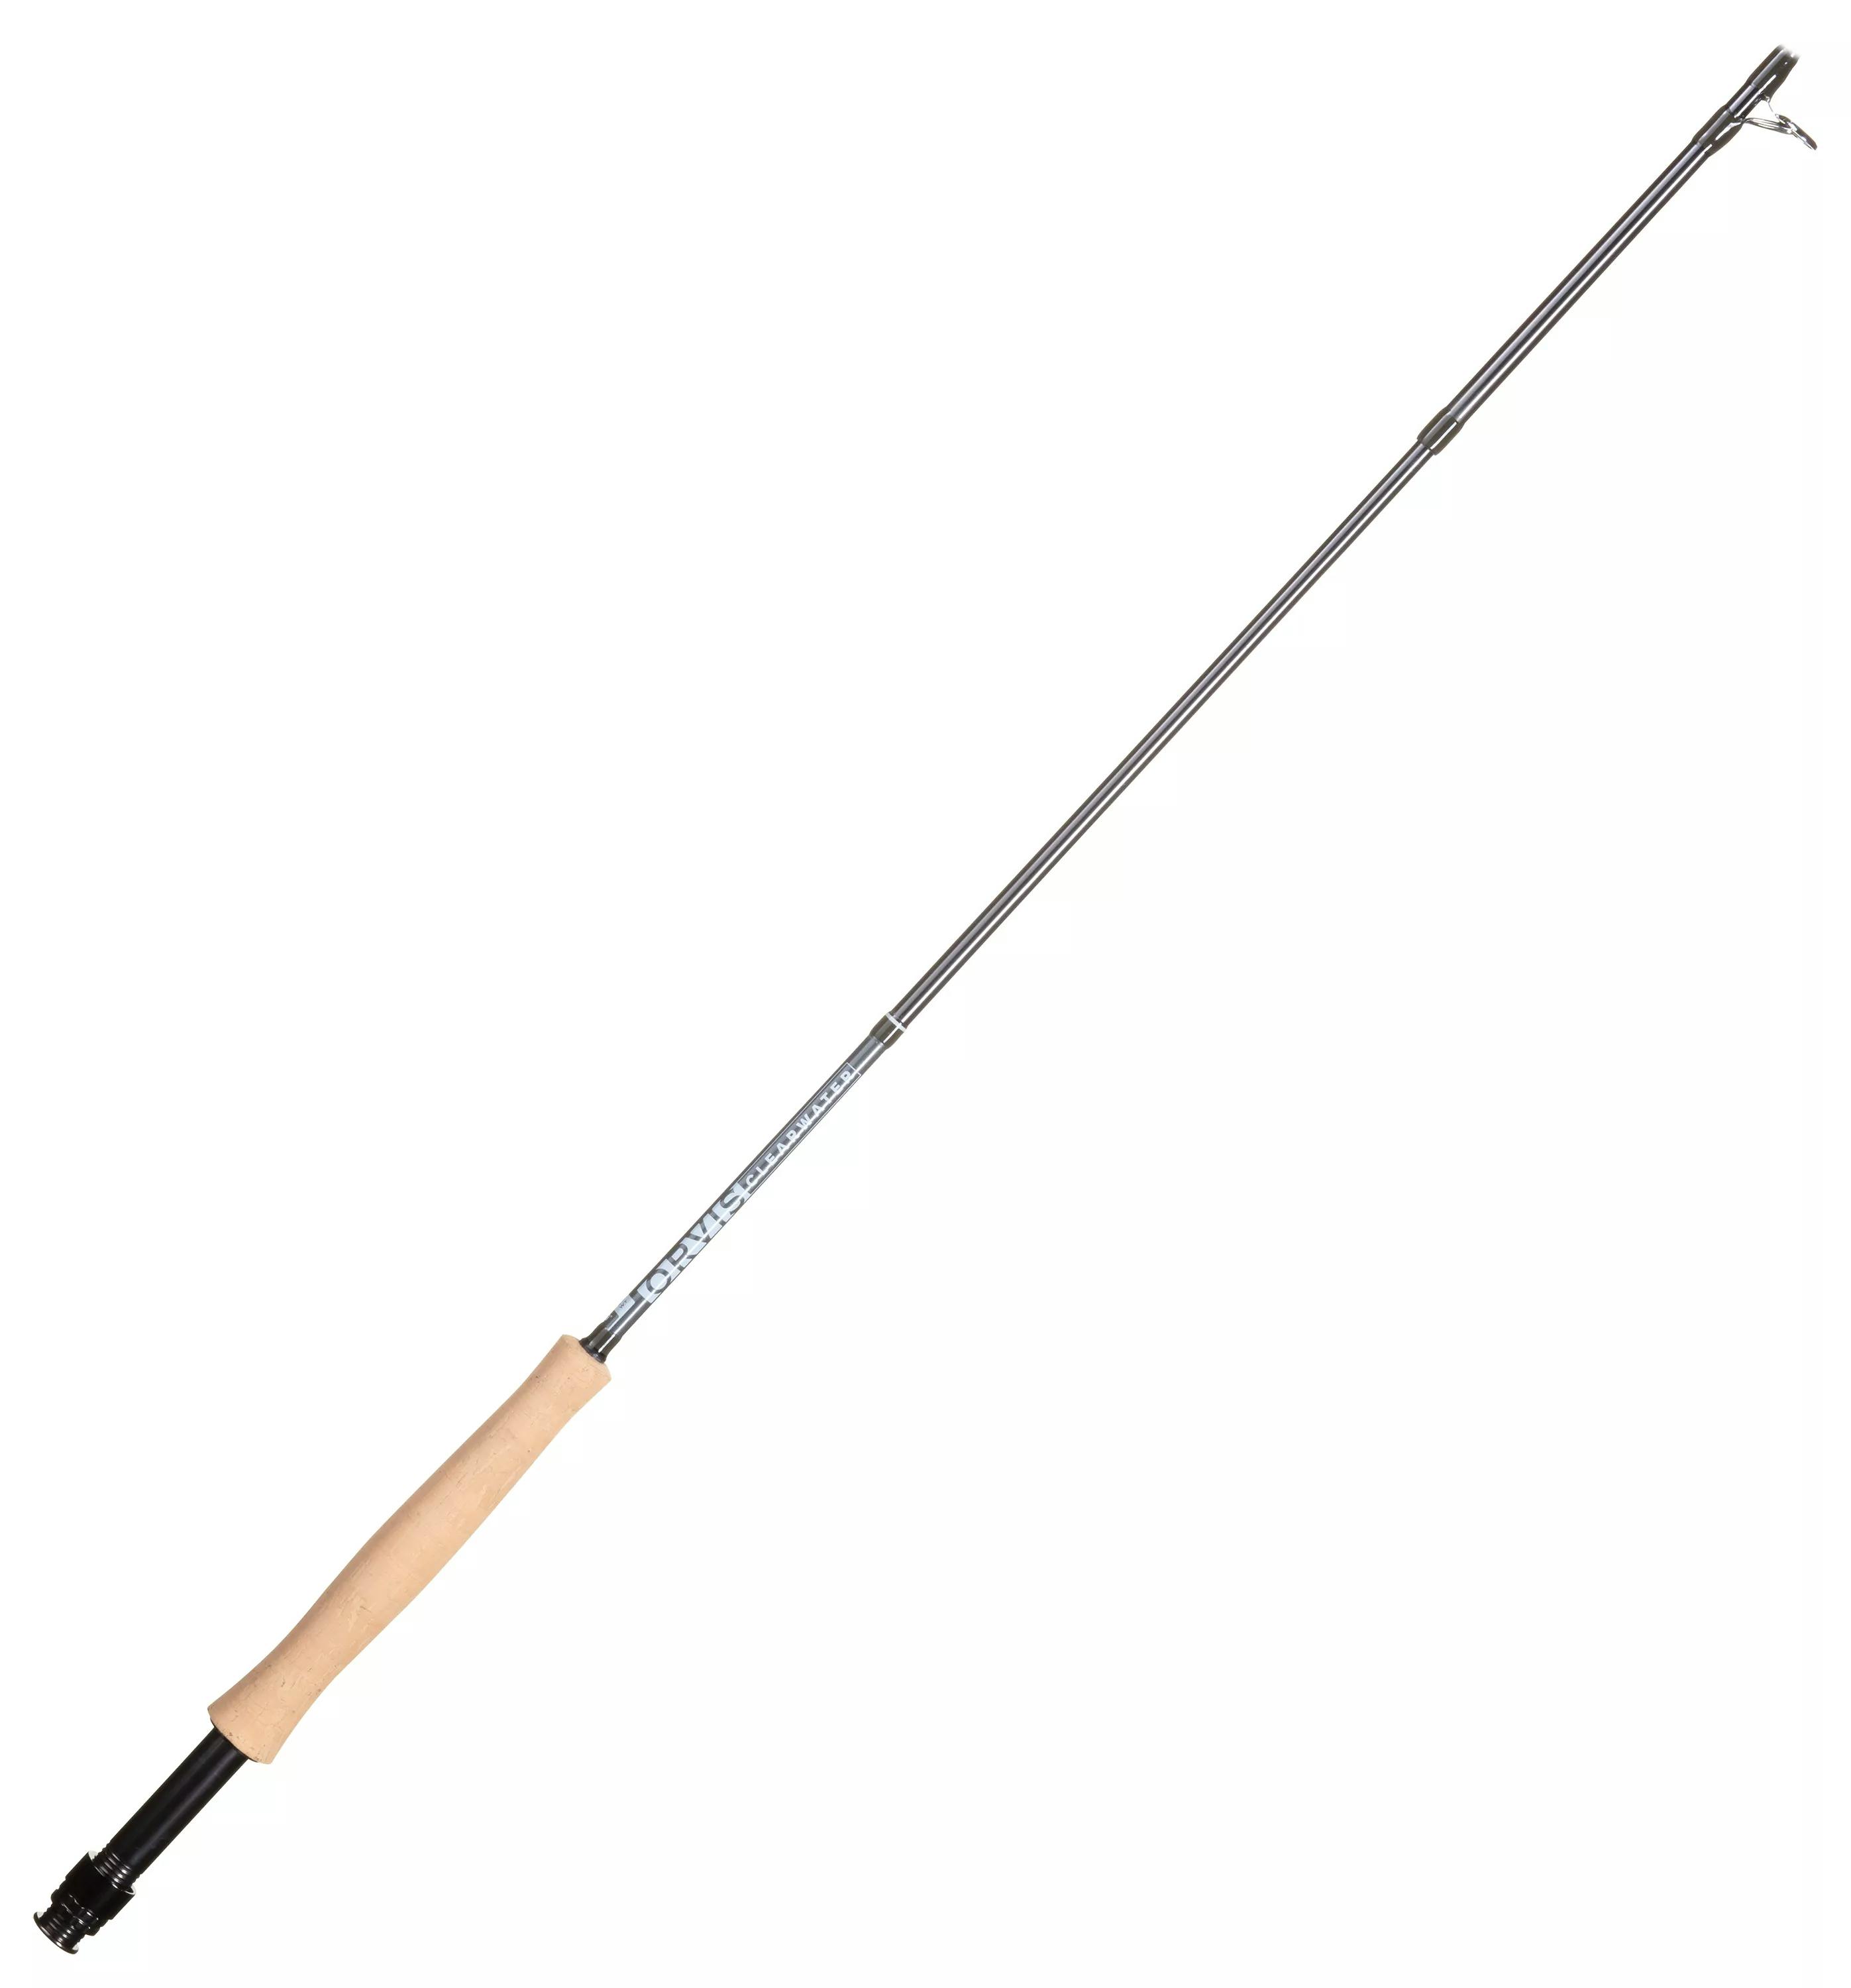 Orvis Clearwater Big Game Fly Rod - Aluminum